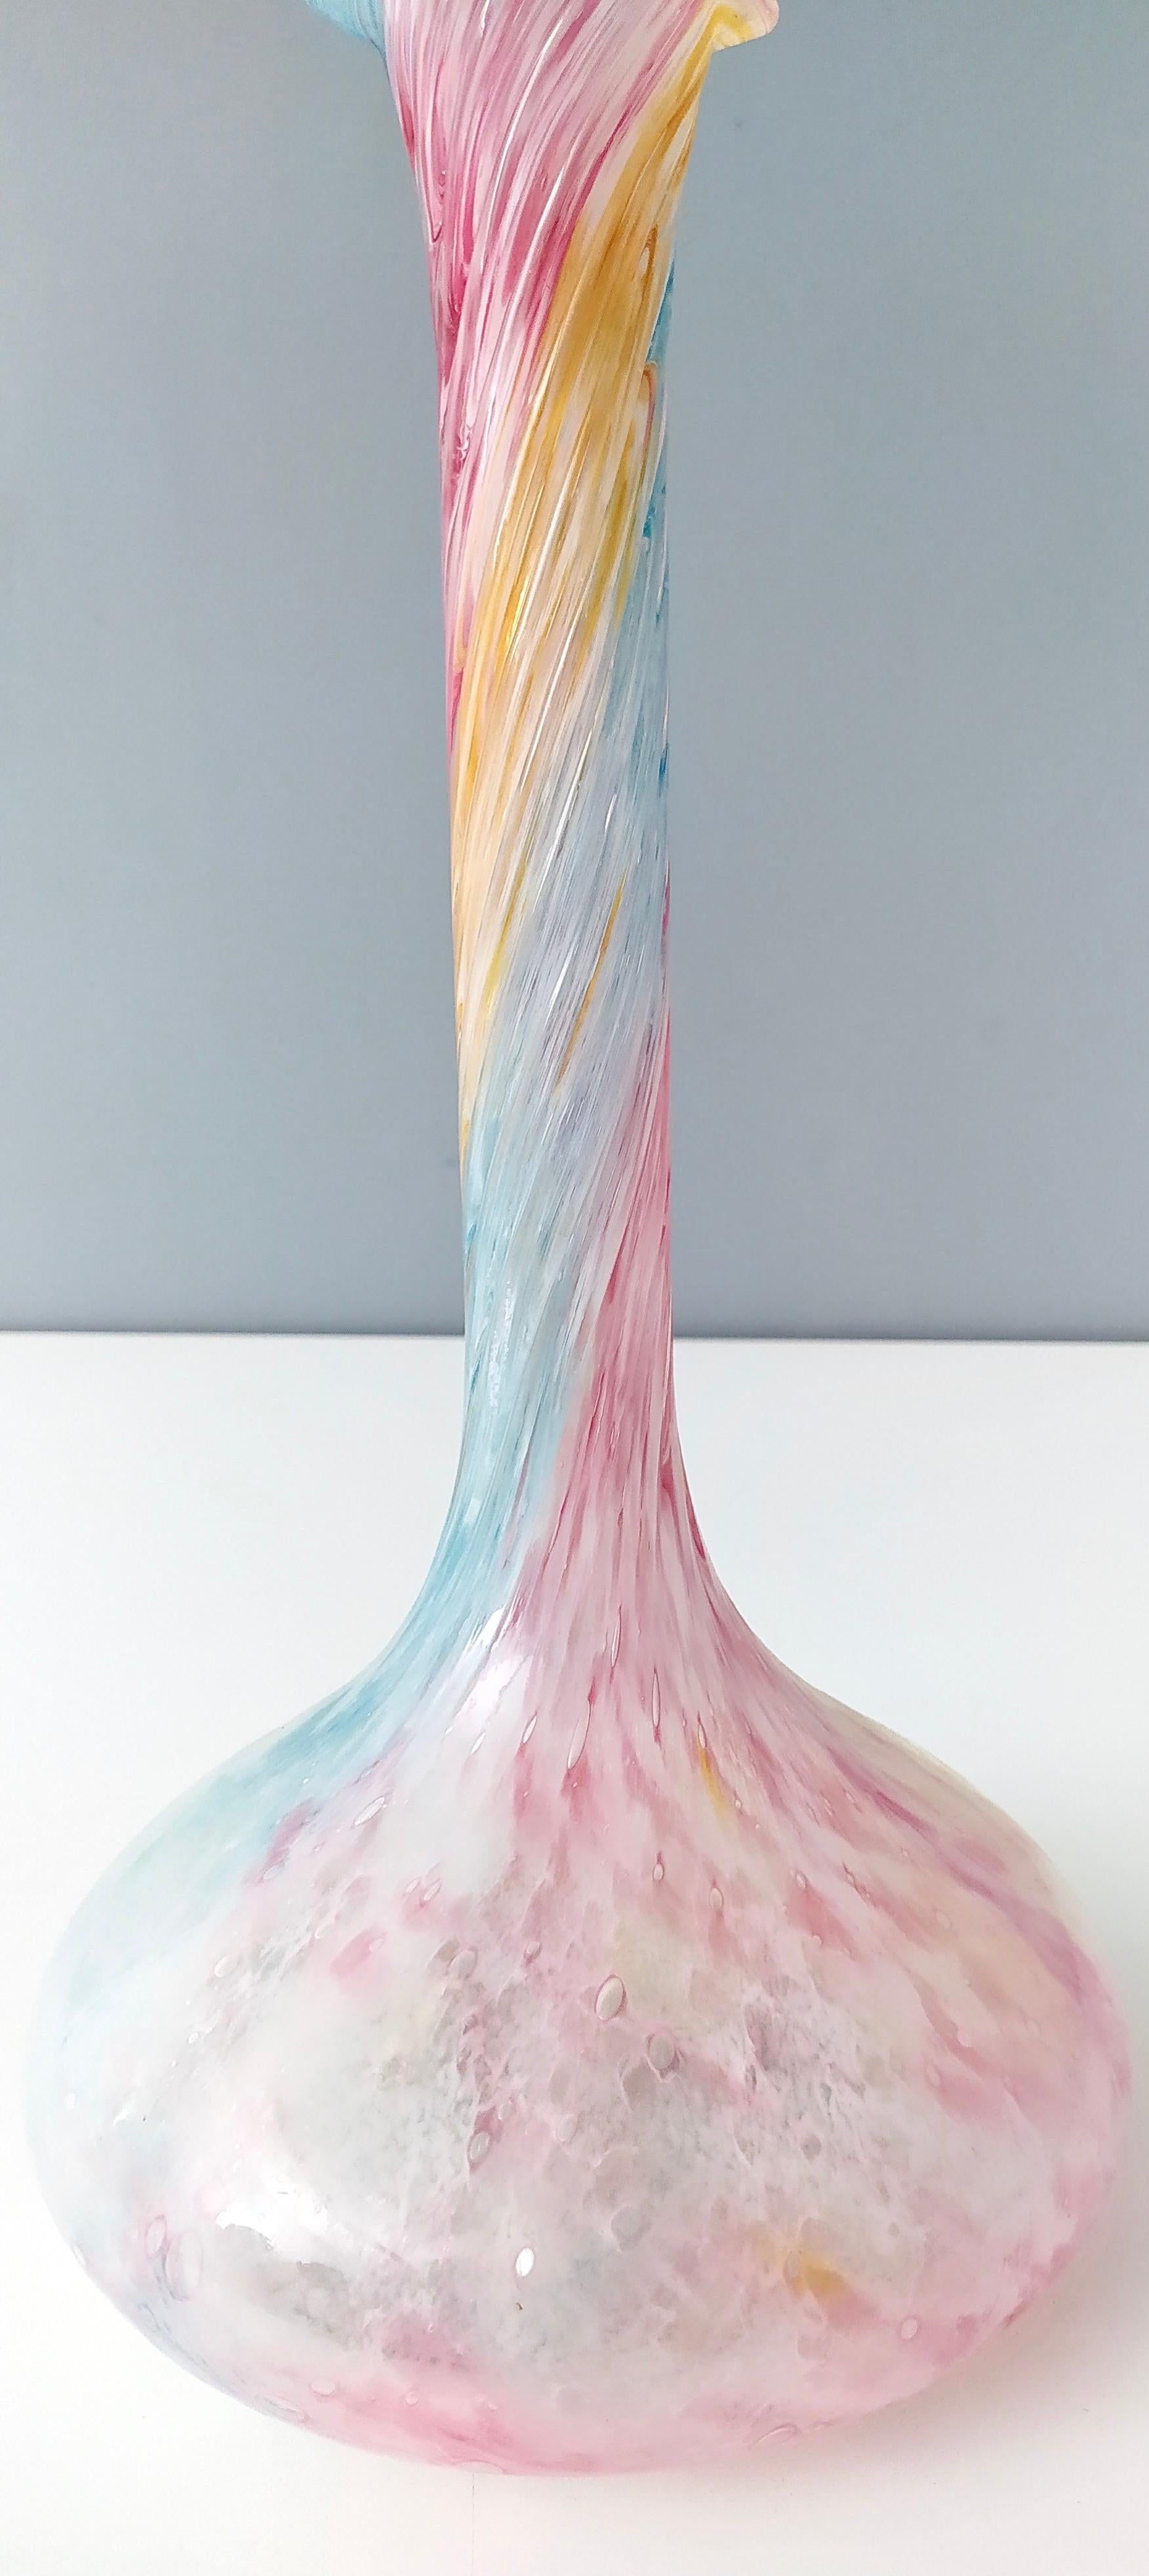 Vintage Pastel Colors Polychrome Murano Glass Flower Vase, Italy In Excellent Condition For Sale In Bresso, Lombardy